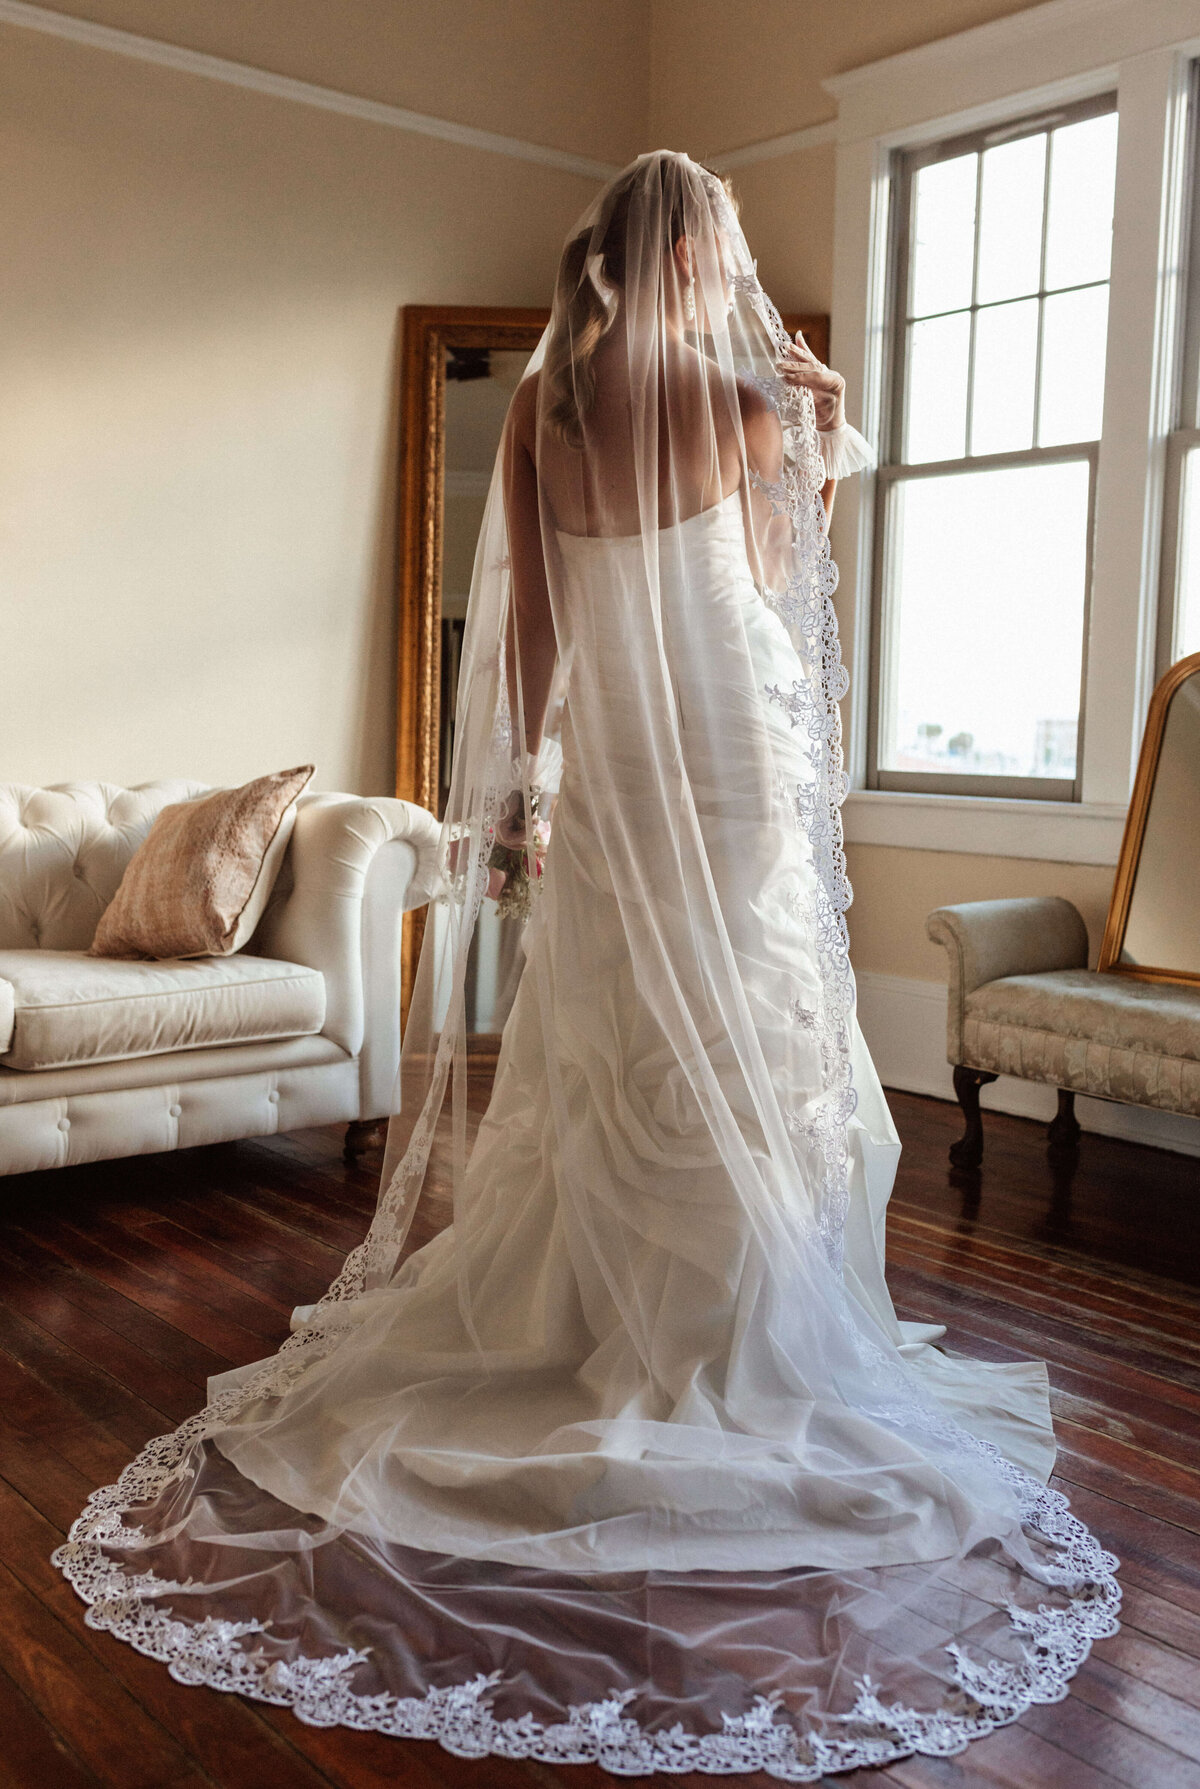 Bride looks into mirror, photo from back with veil draping her-in downtown Panama City wedding venue Sapp House